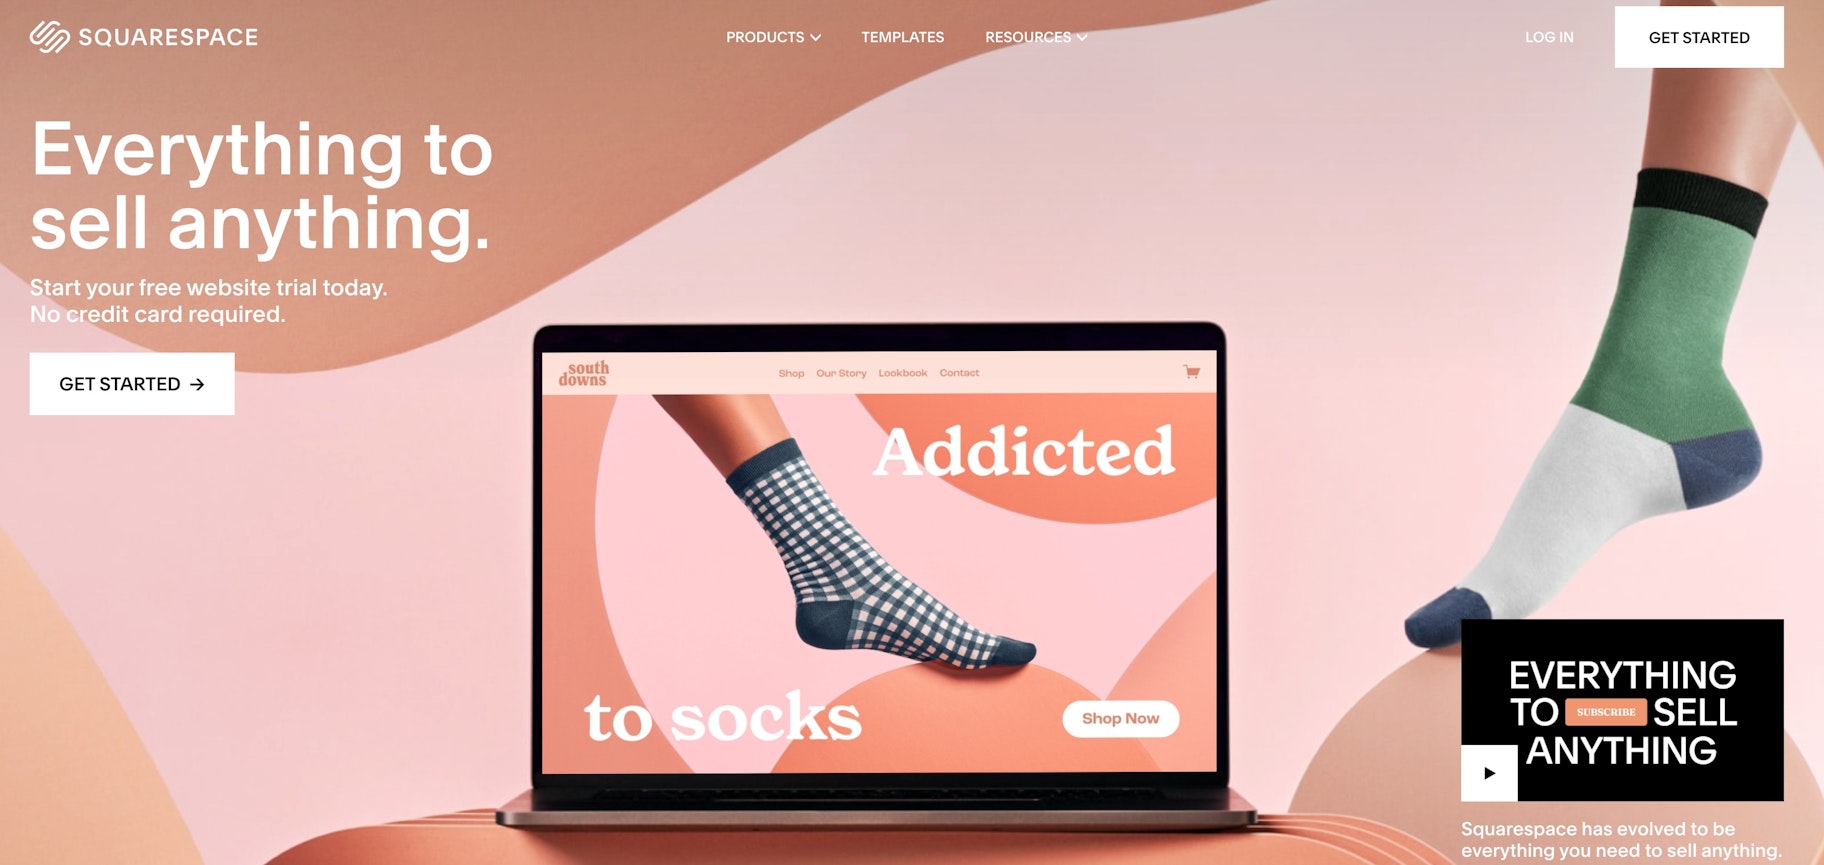 website builder for crafters: Squarespace